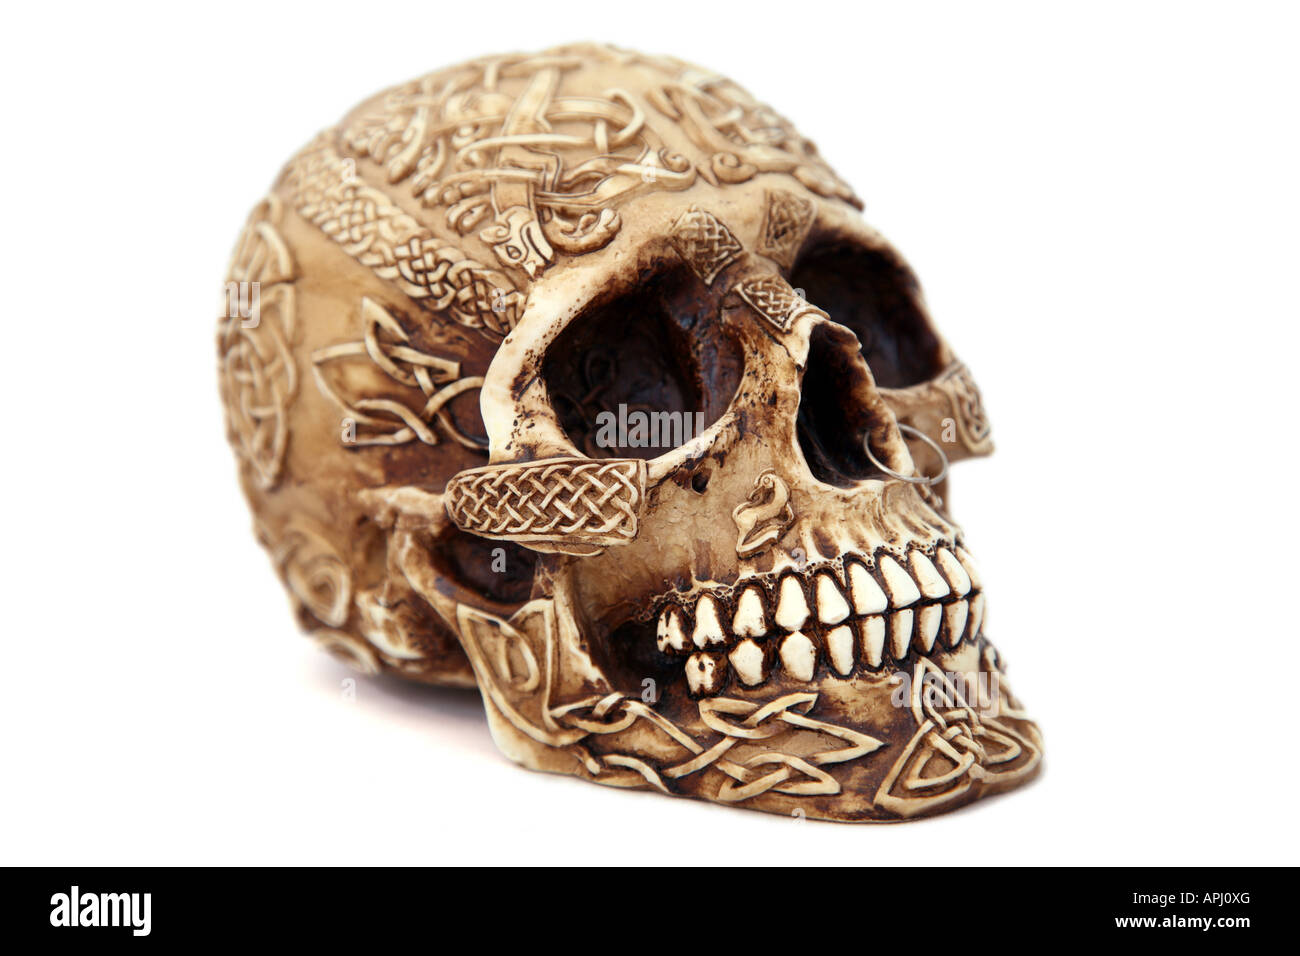 Human Skull made from resin Stock Photo